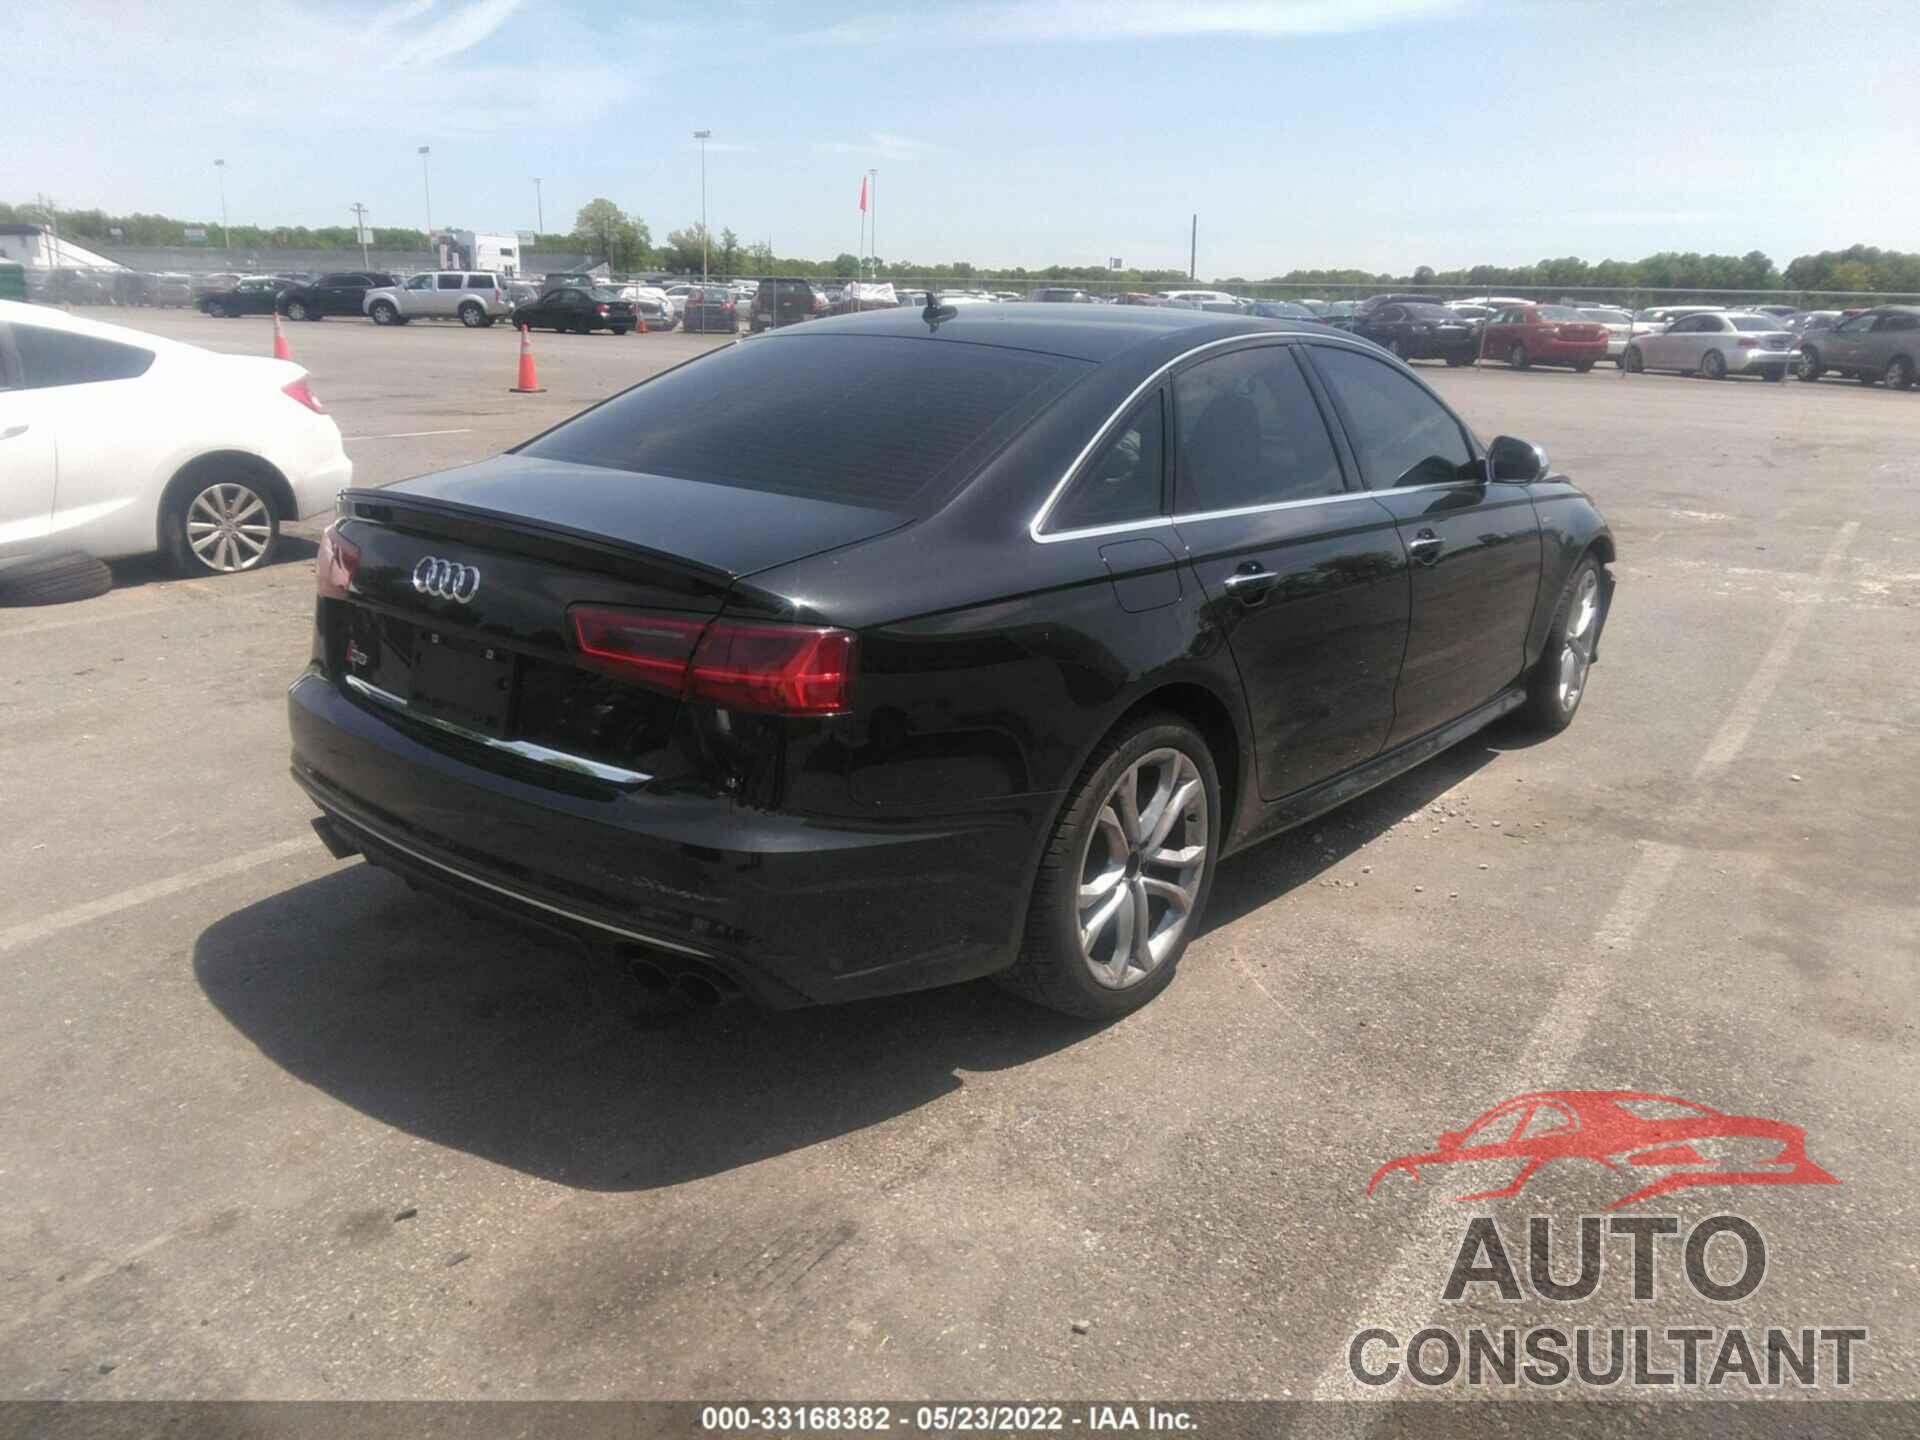 AUDI S6 2016 - WAUF2AFC8GN078130